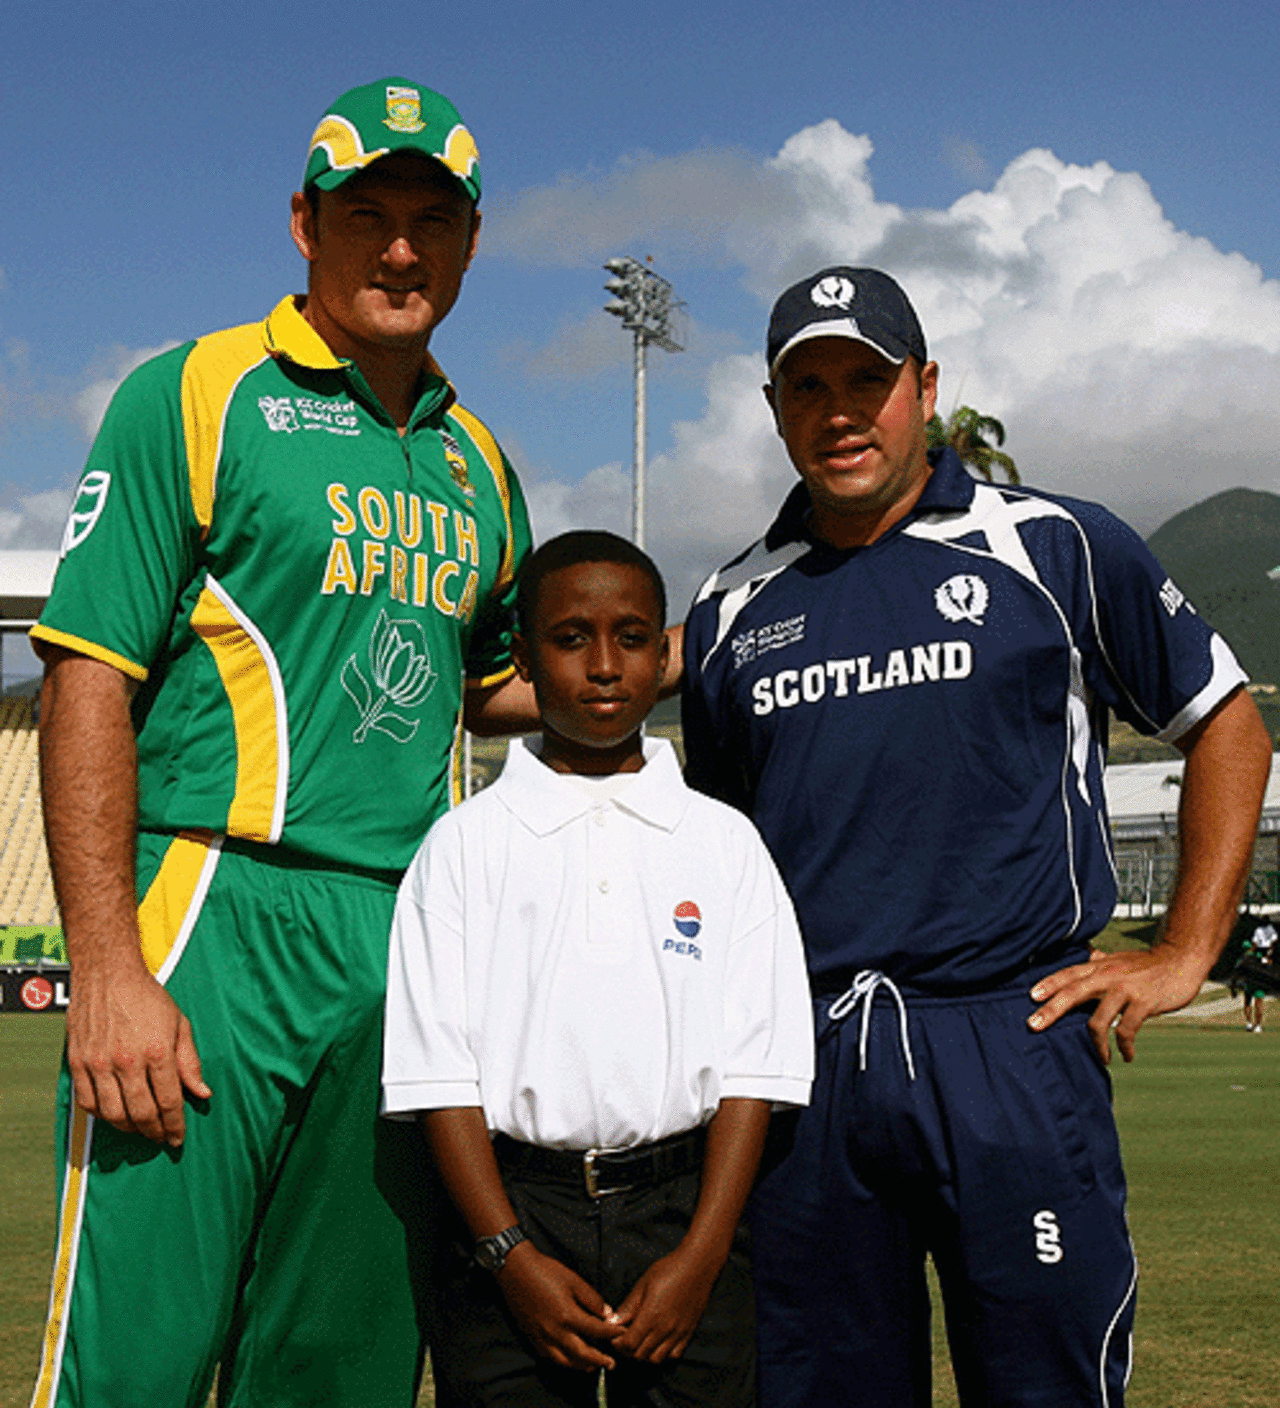 Graeme Smith and Ryan Watson pose along with the mascot ahead of their match, Scotland v South Africa, Group A, St Kitts, March 20, 2007